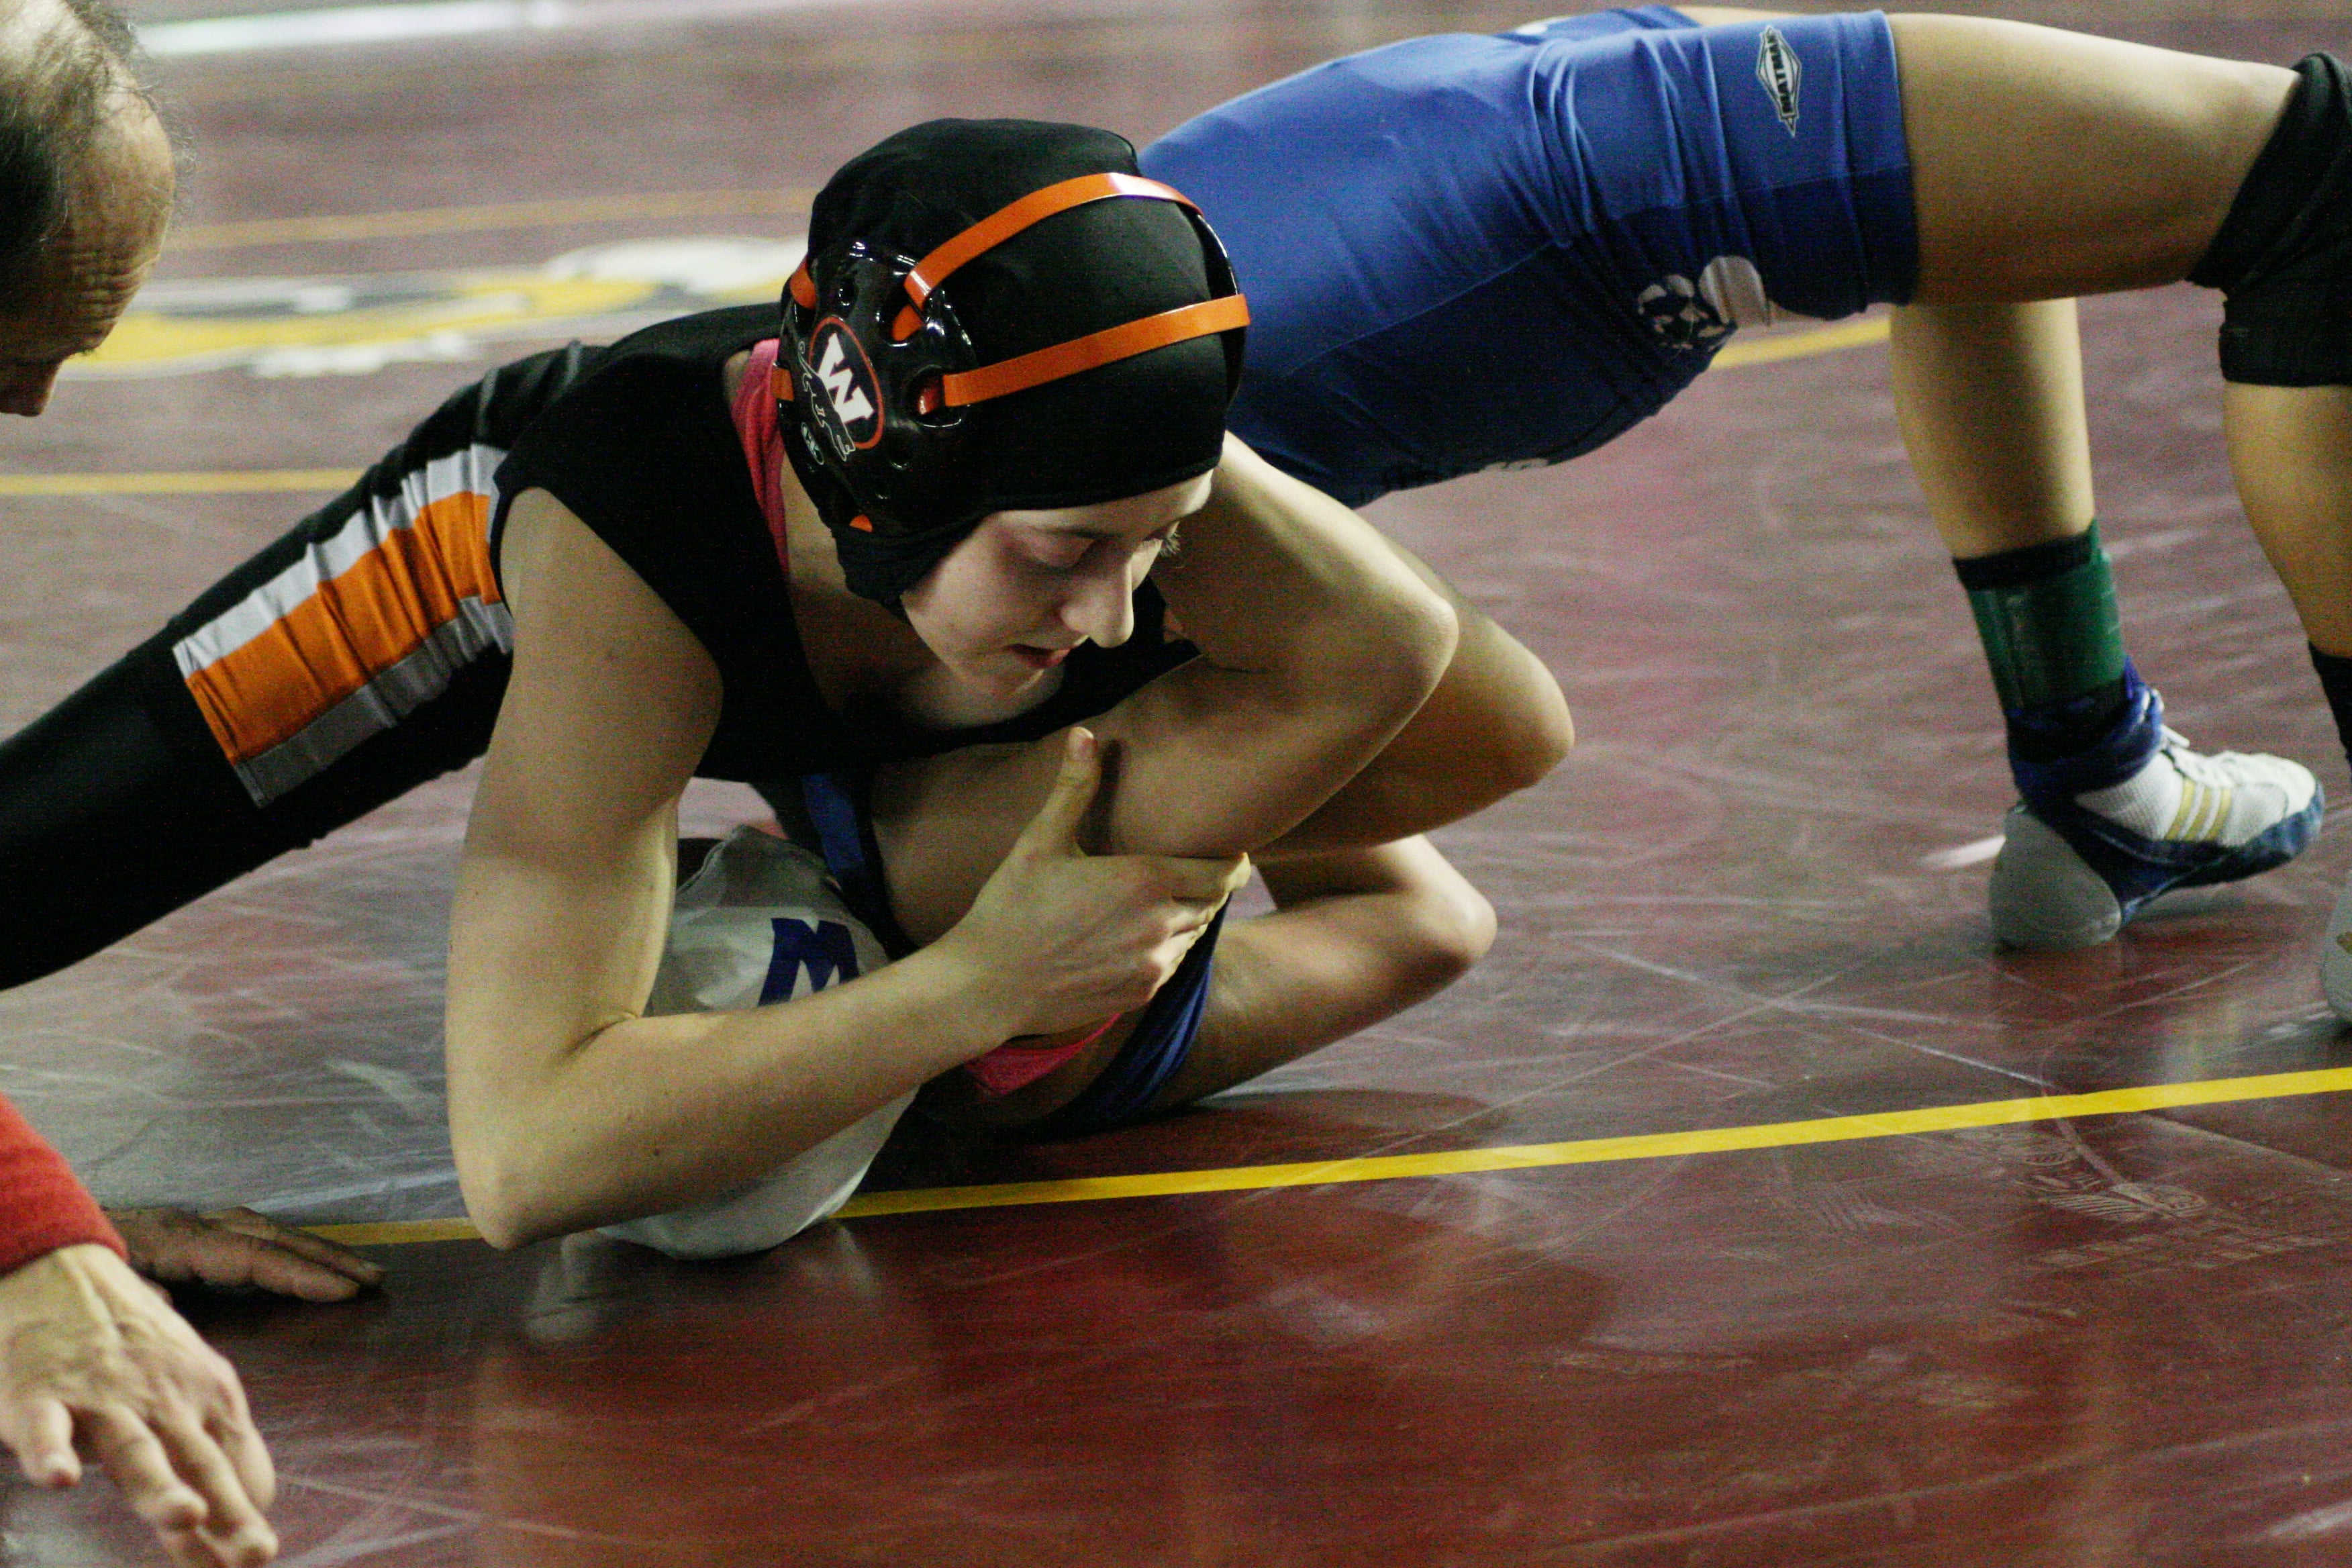 Jessica Eakins put the finishing touches on her high school career with a pinfall victory.